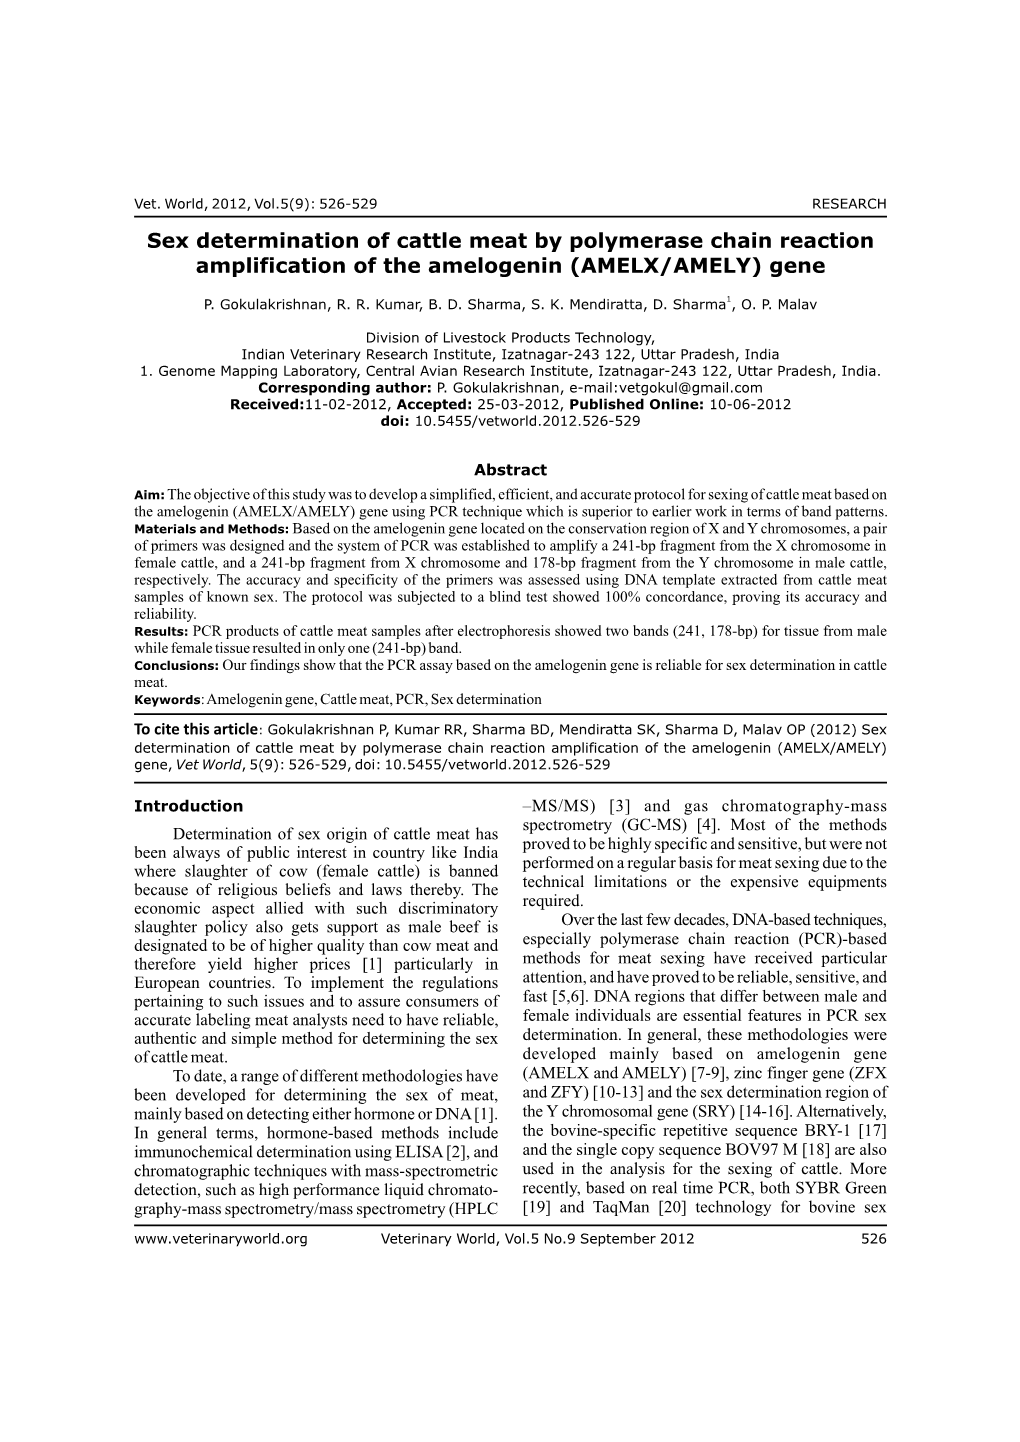 Sex Determination of Cattle Meat by Polymerase Chain Reaction Amplification of the Amelogenin (AMELX/AMELY) Gene